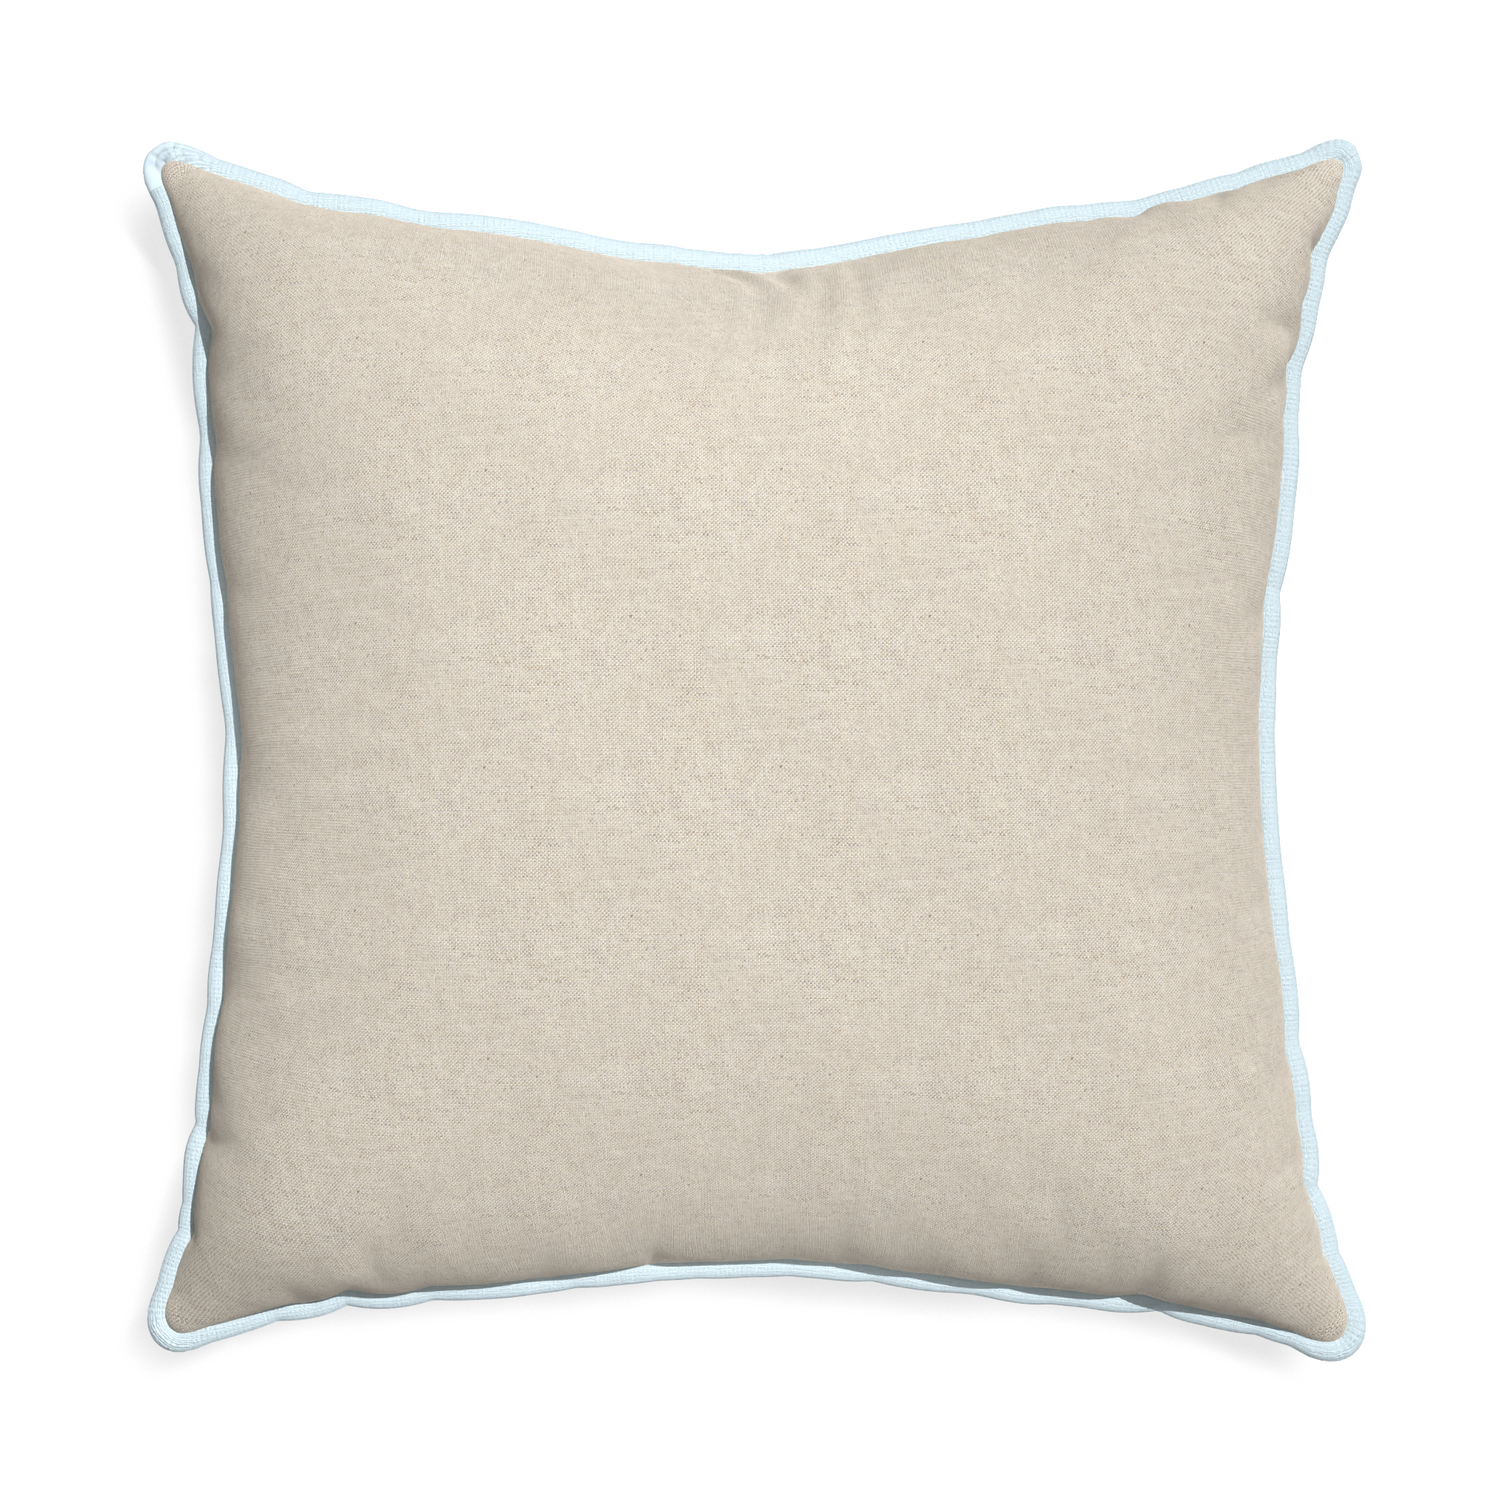 Euro-sham oat custom light brownpillow with powder piping on white background